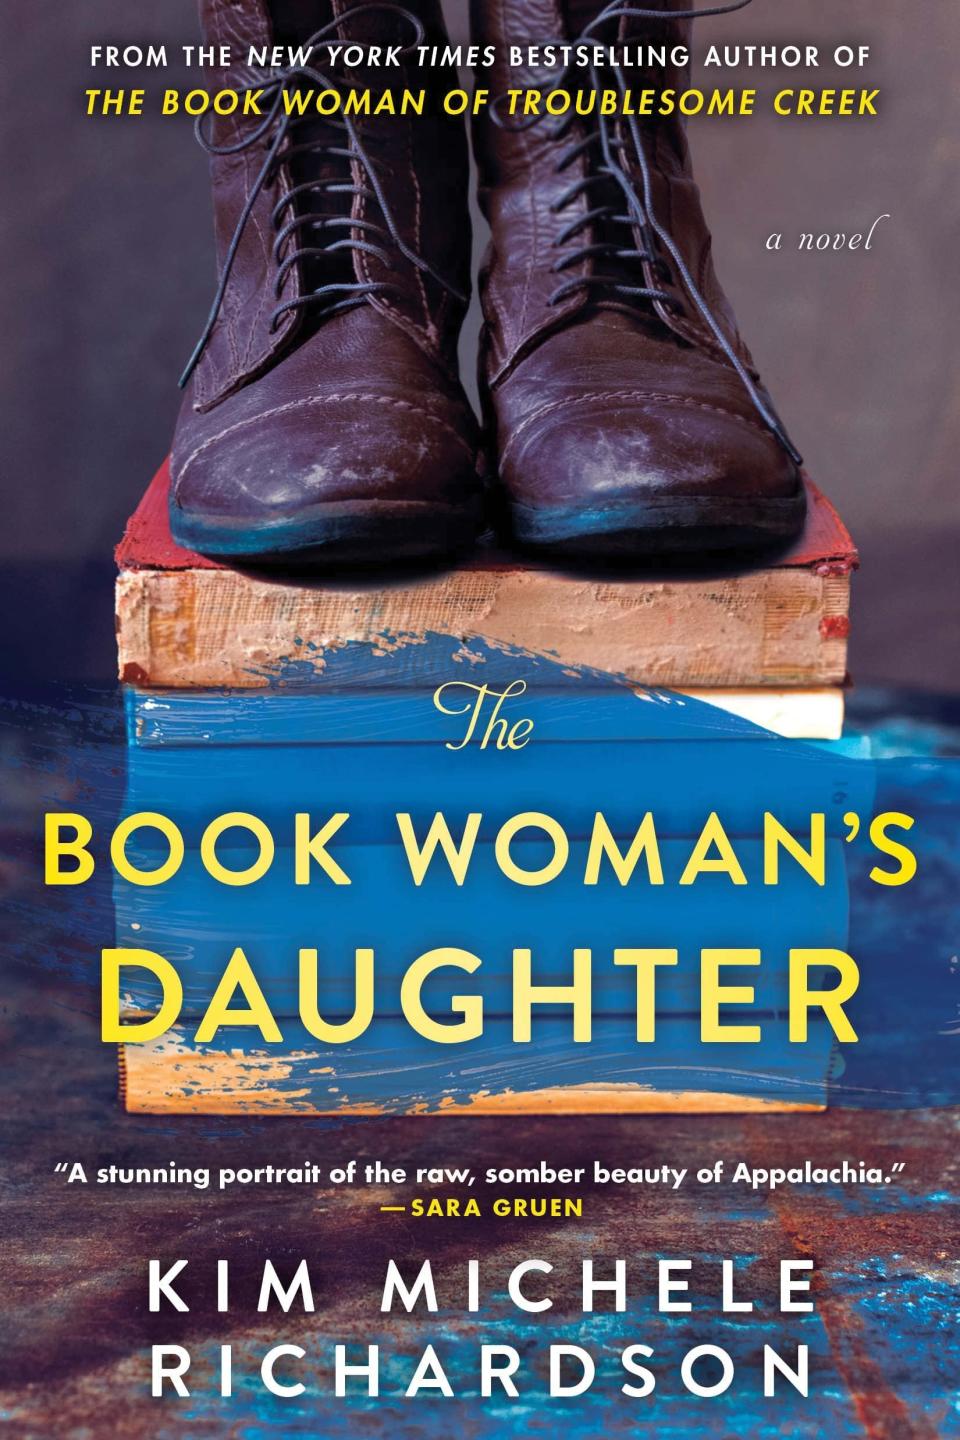 <p>Kim Michele Richardson returns with another tale of strong-willed women and the power of books in "<span>The Book Woman's Daughter</span>." Honey grows up in rural Kentucky as the daughter of the blue-skinned, Troublesome Creek packhorse librarian. She's no stranger to the dangers of the world around them, nor the fact that the law always has their eye on her family. When her parents are arrested and sent to prison, Honey takes over the packhorse library route to deliver books to the most remote corners of the region. Honey fights to prove herself and, along the way, learns about the other women who run the world in their own way.</p> <p><em>Release date: May 3</em></p>